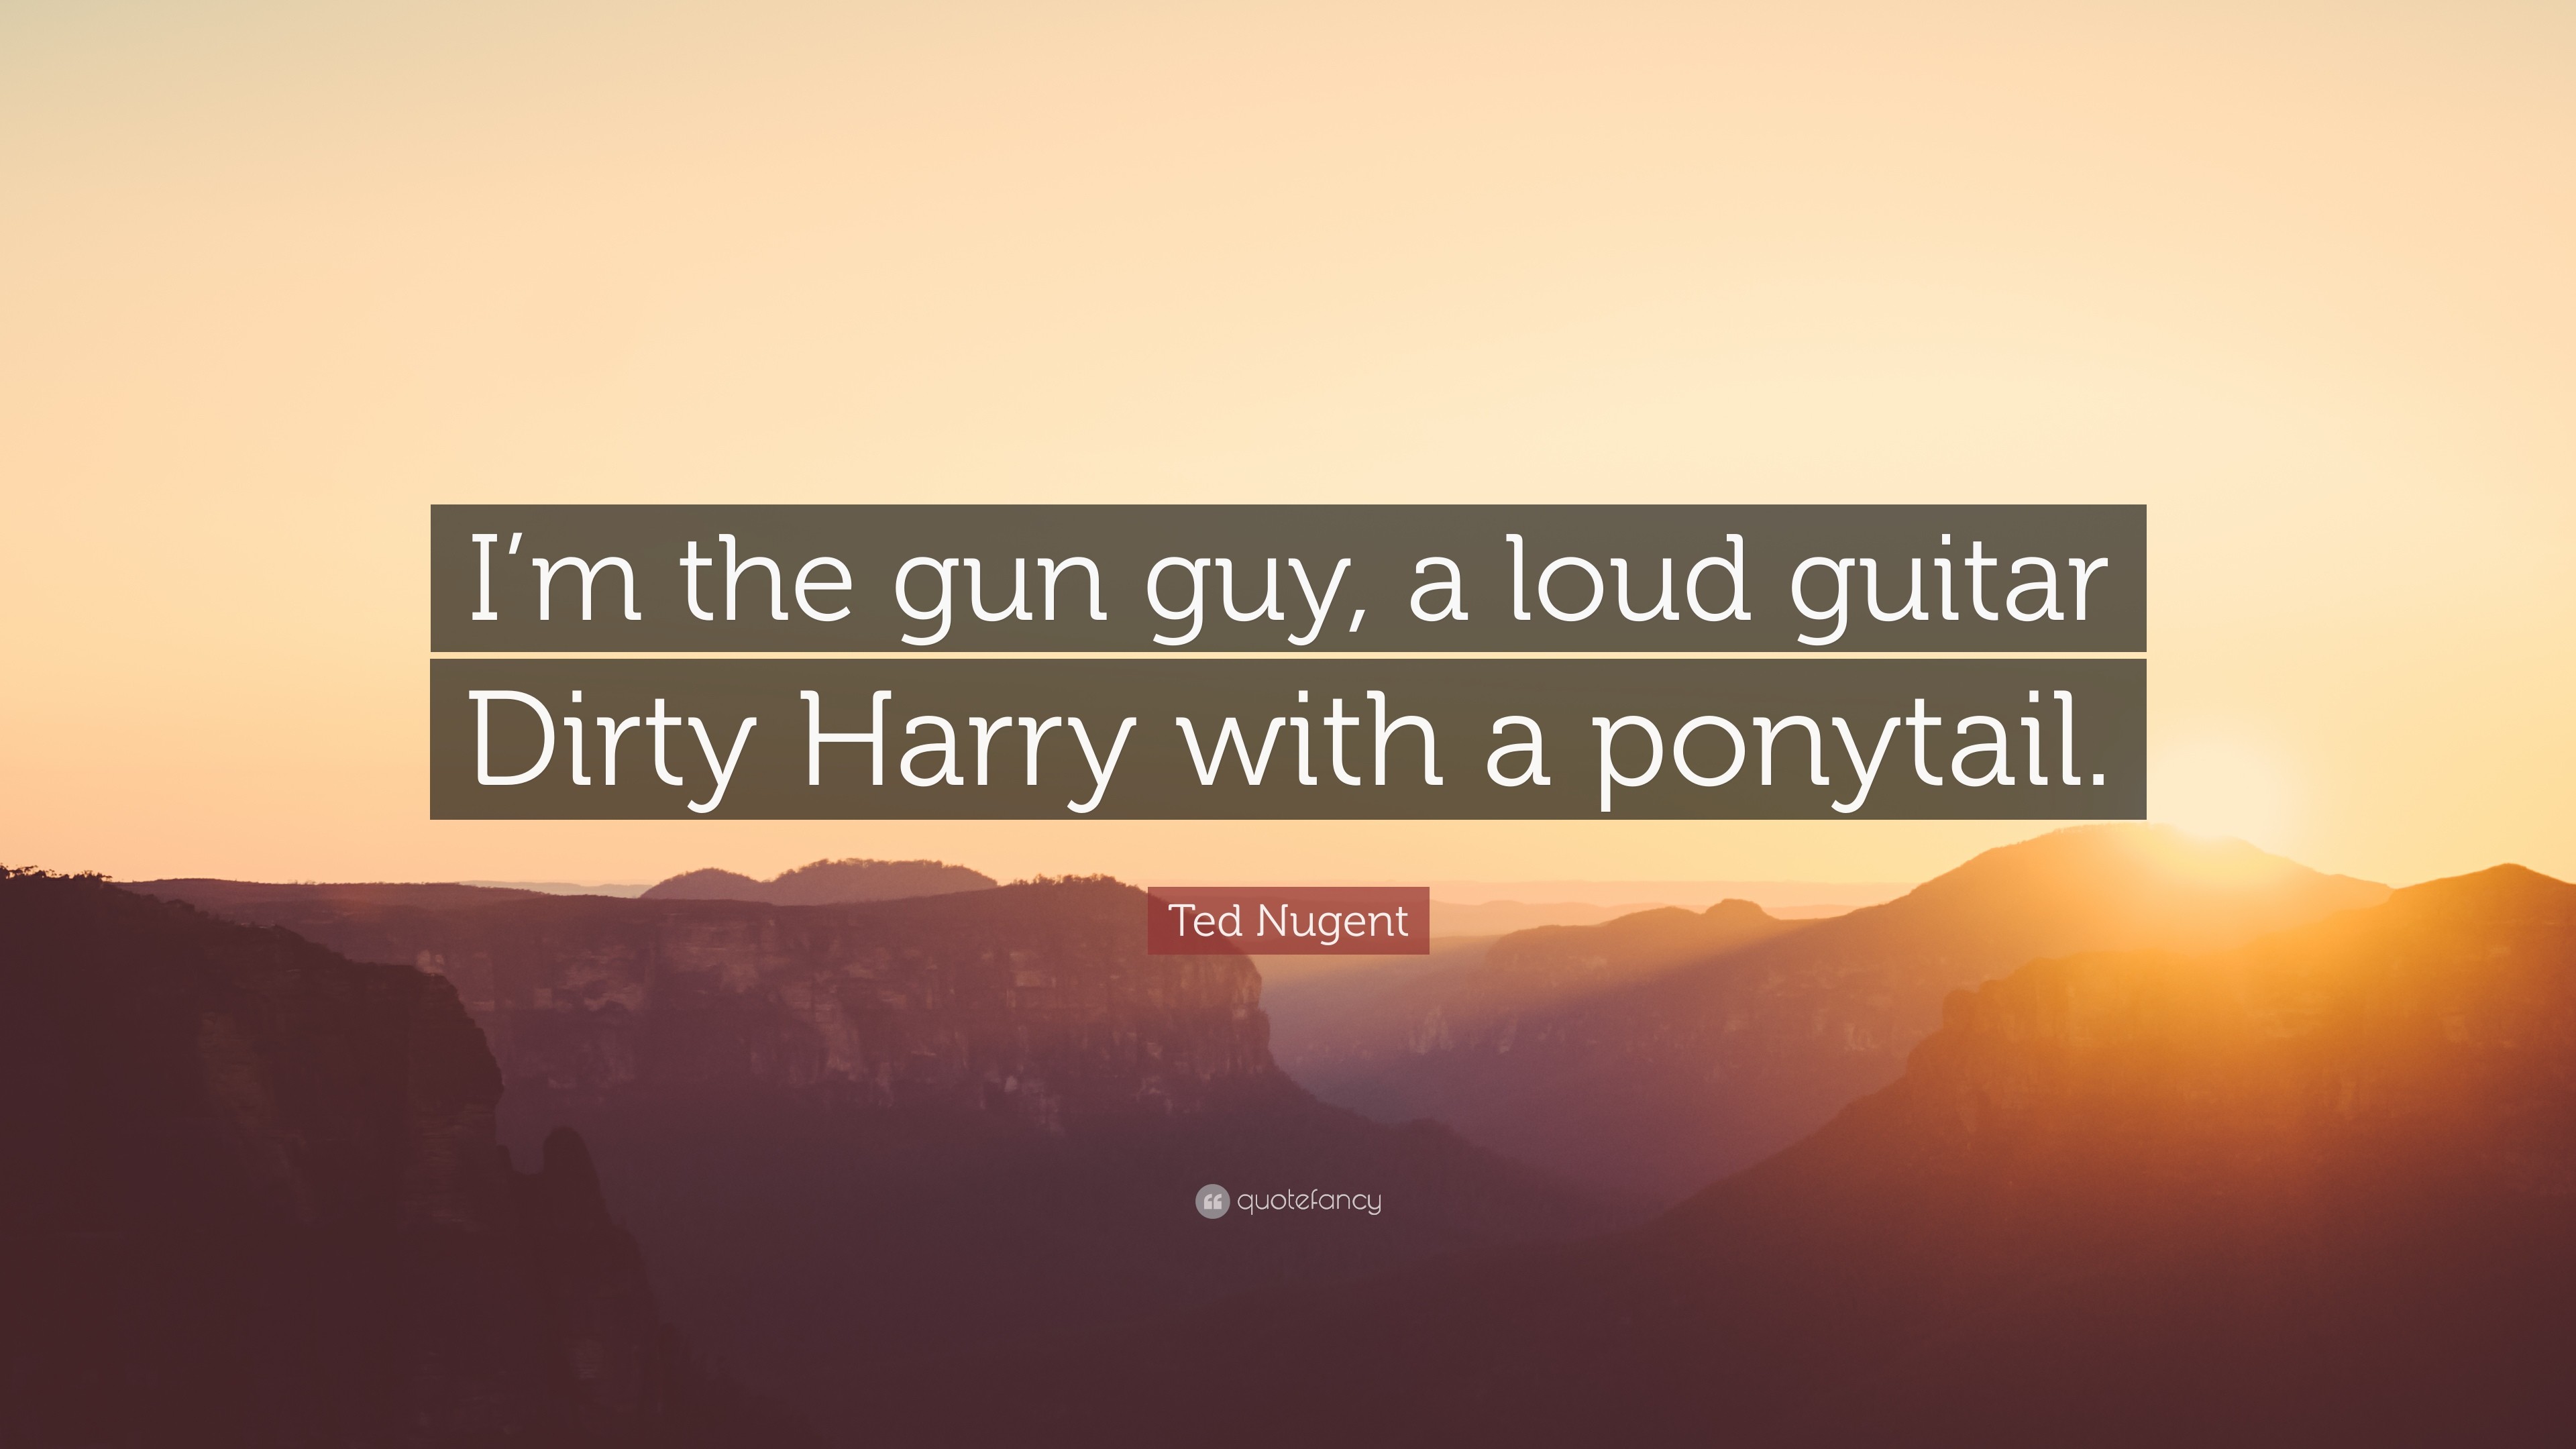 3840x2160 7 wallpapers. Ted Nugent Quote: “I'm the gun guy, a loud guitar Dirty